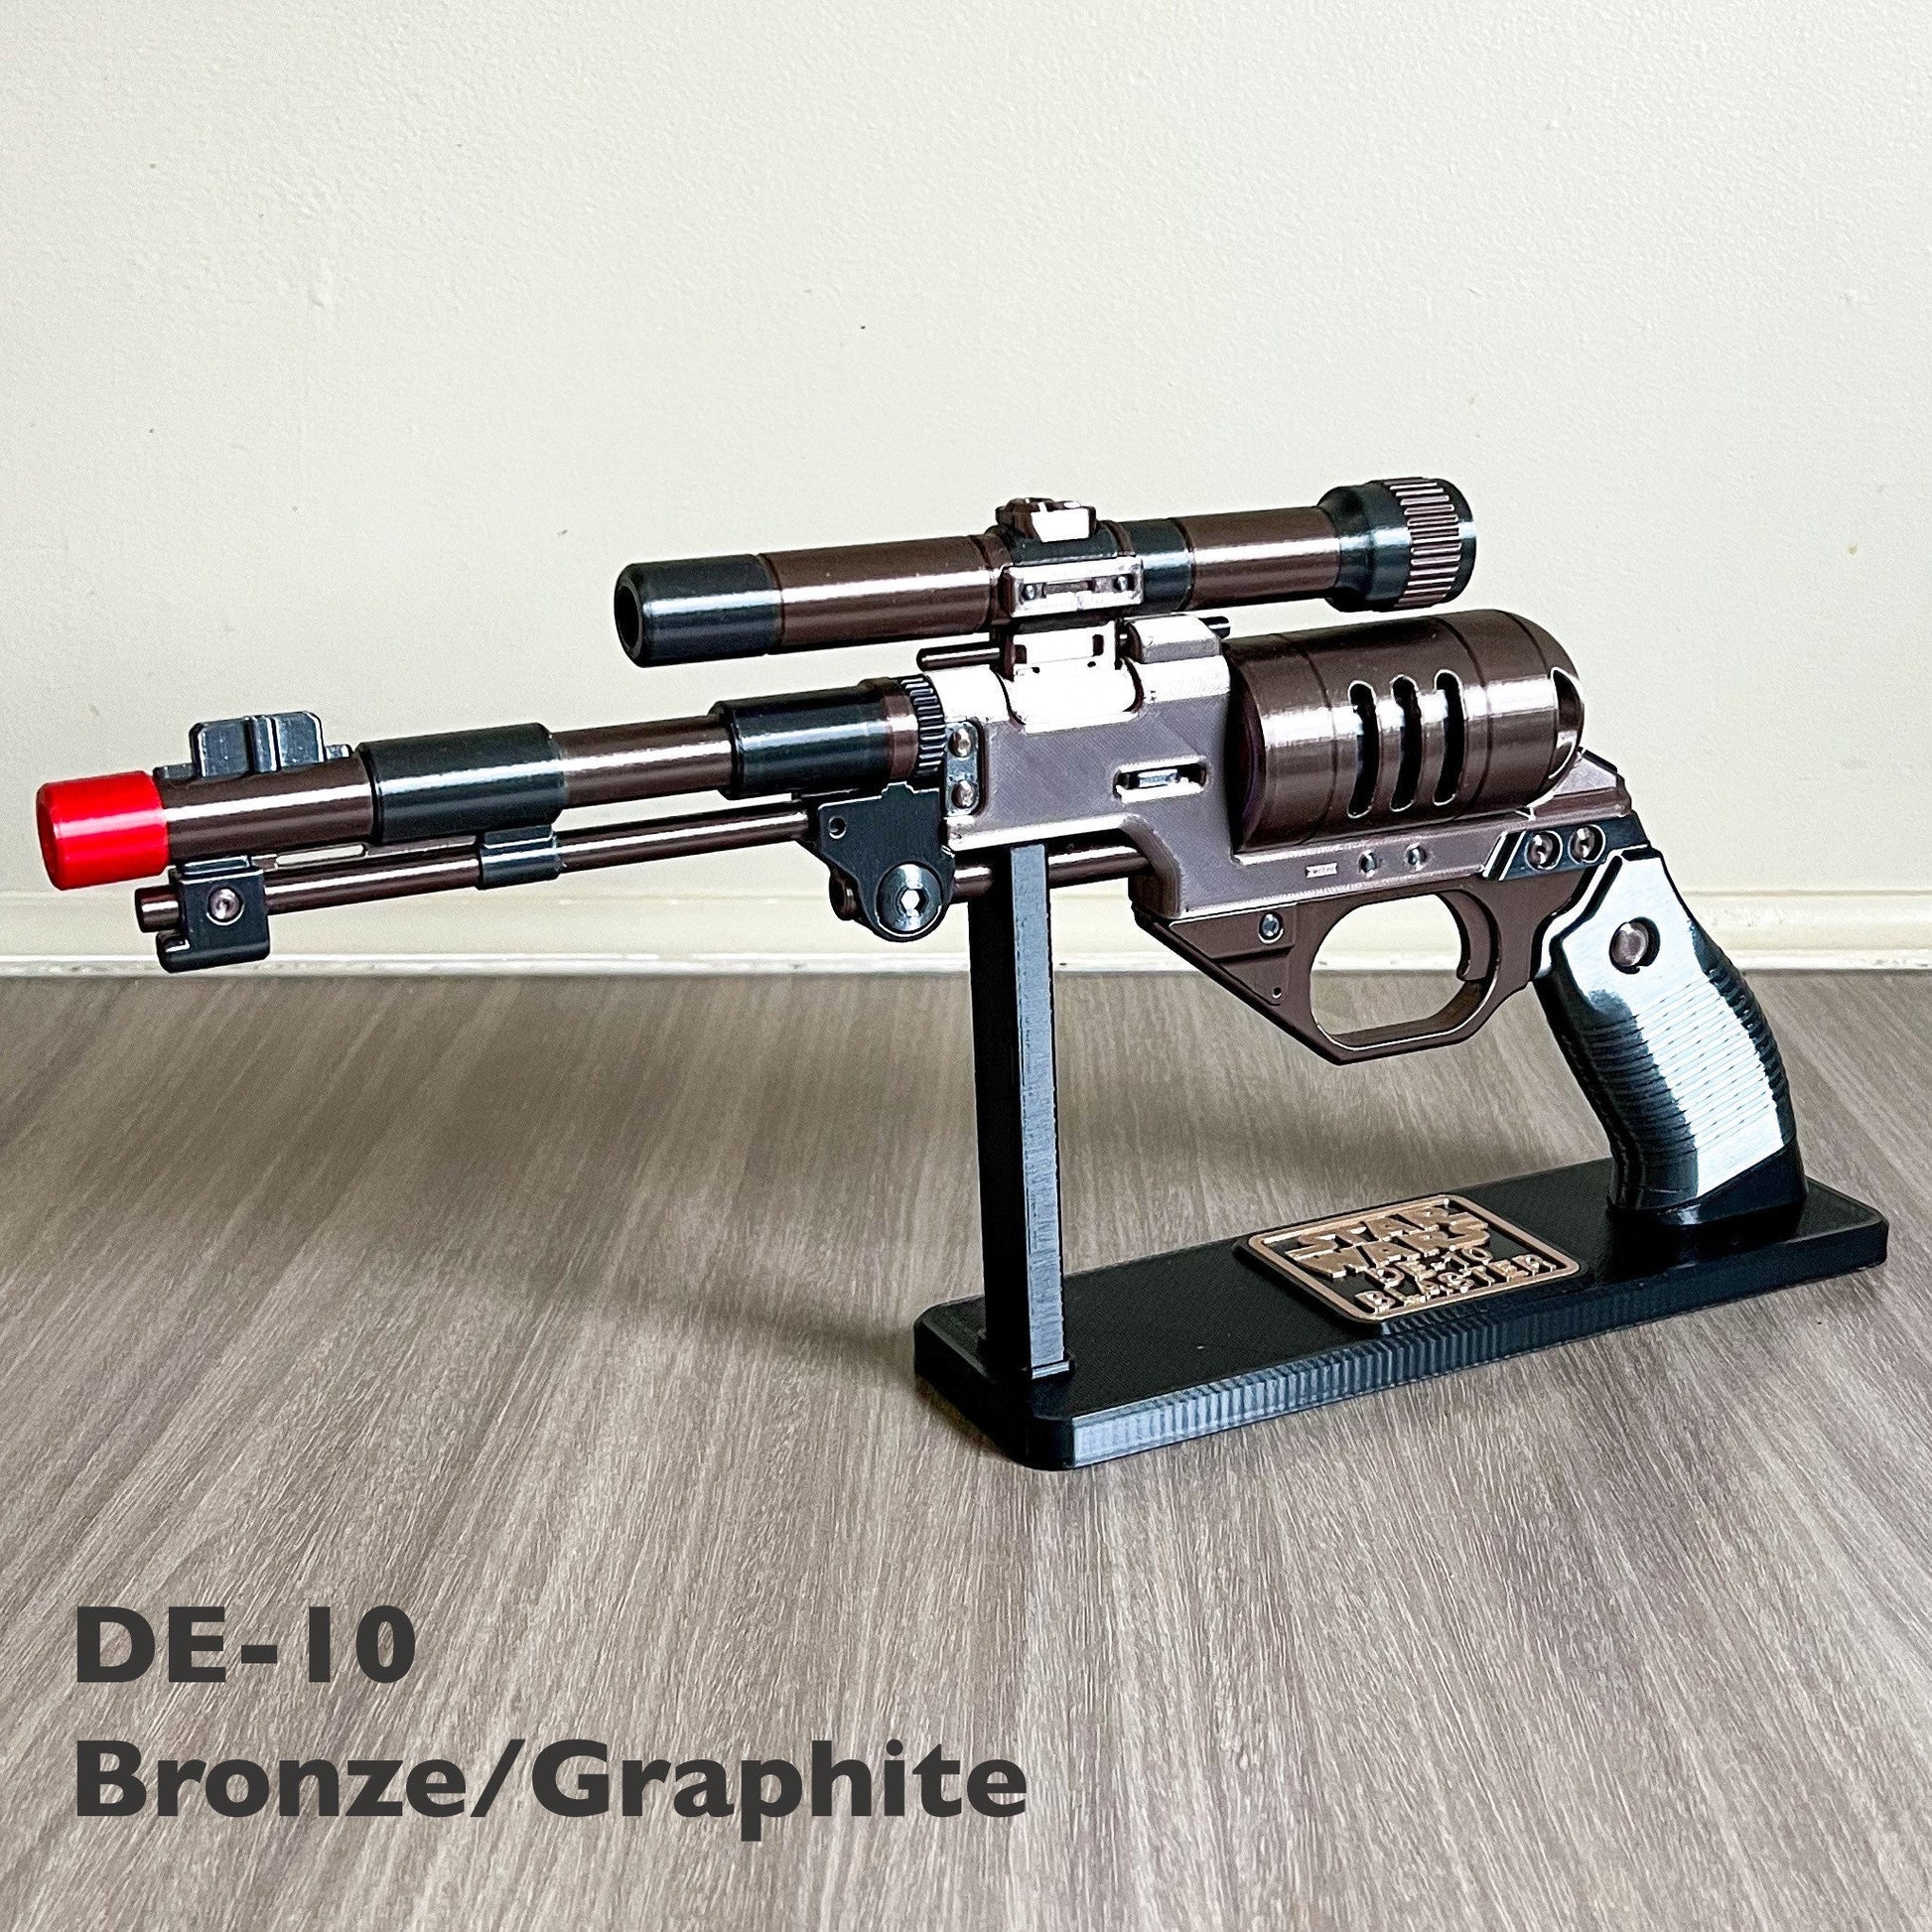 DE-10 Blaster With a Stand Cosplay Prop Replica, Post Apocalyptic Larp Weapon, Cyberpunk Cosplay Prop Weapon